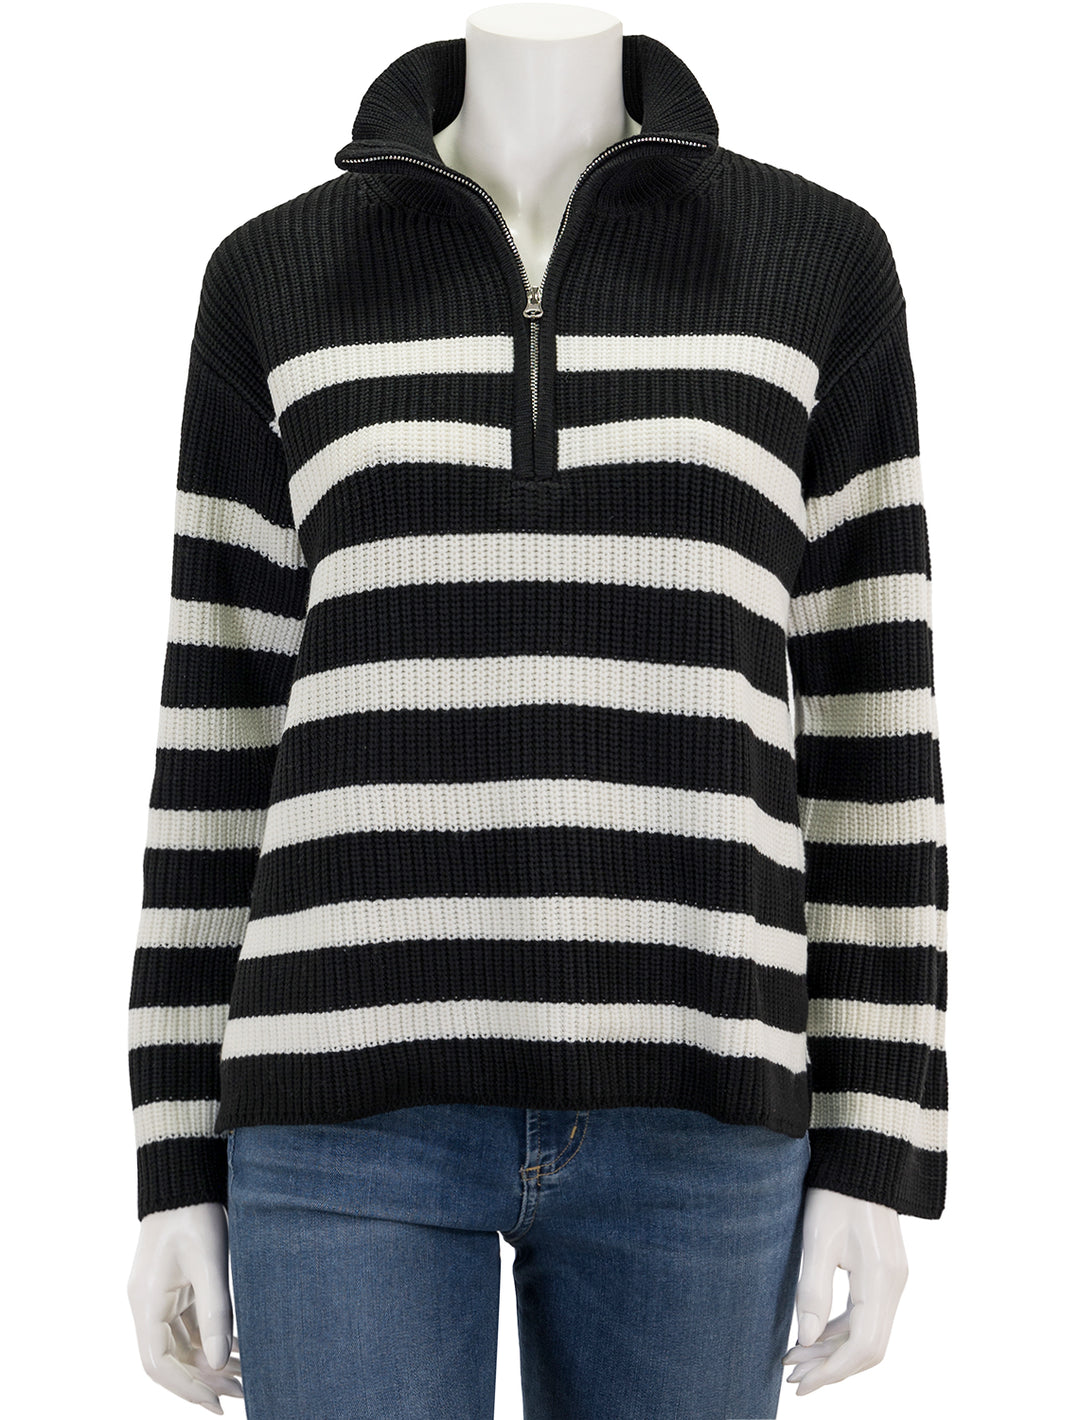 Front view of English Factory's striped half zip sweater in black and white.